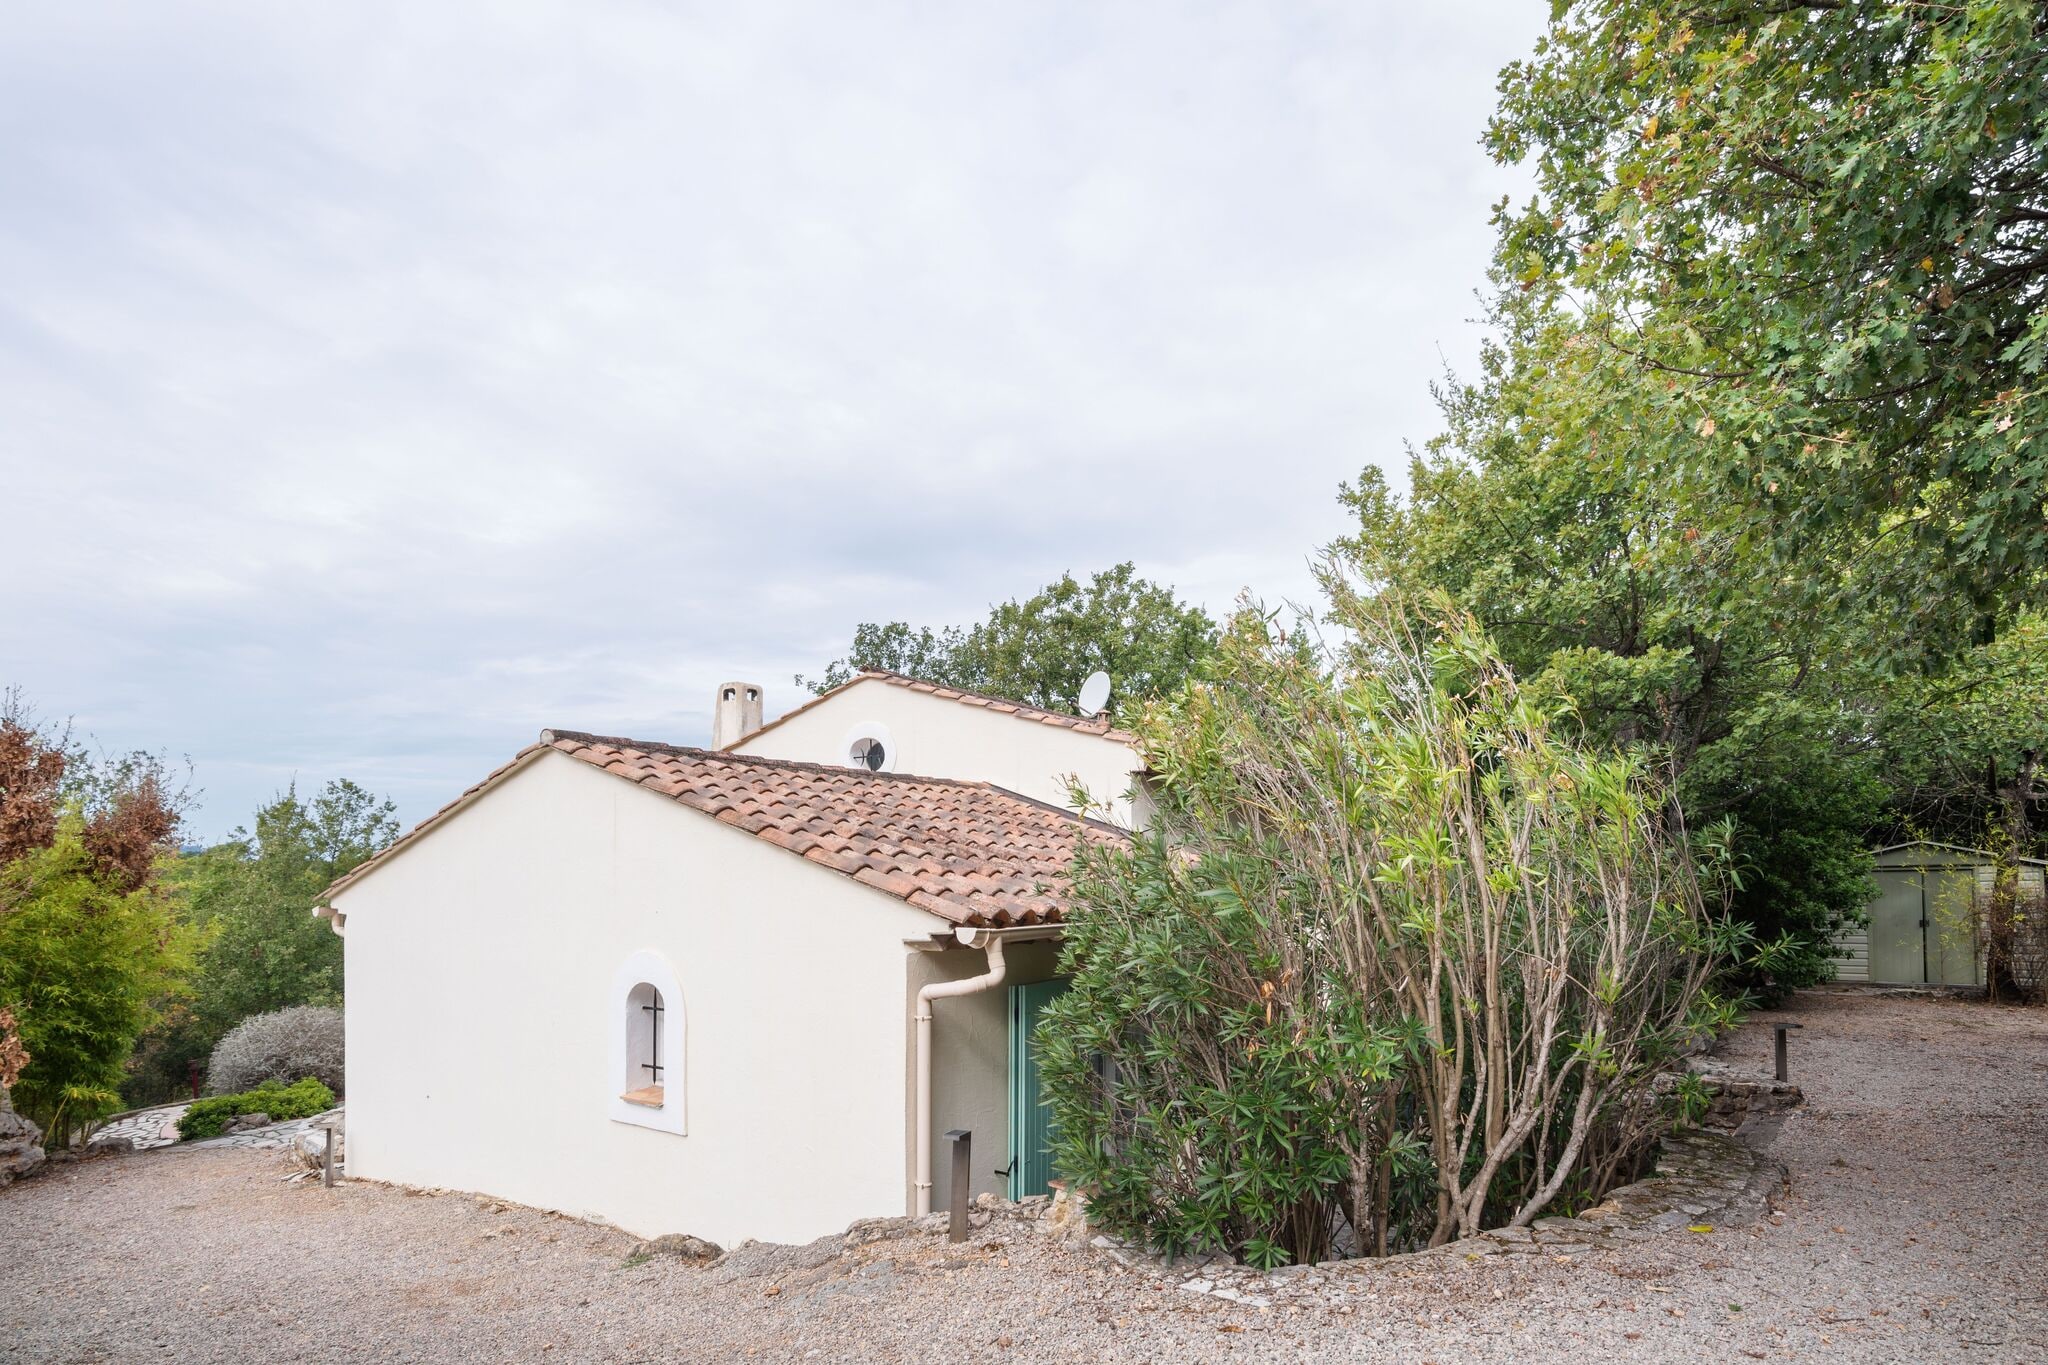 Beautiful villa with a quiet location in the green hinterland of FrÃ©jus